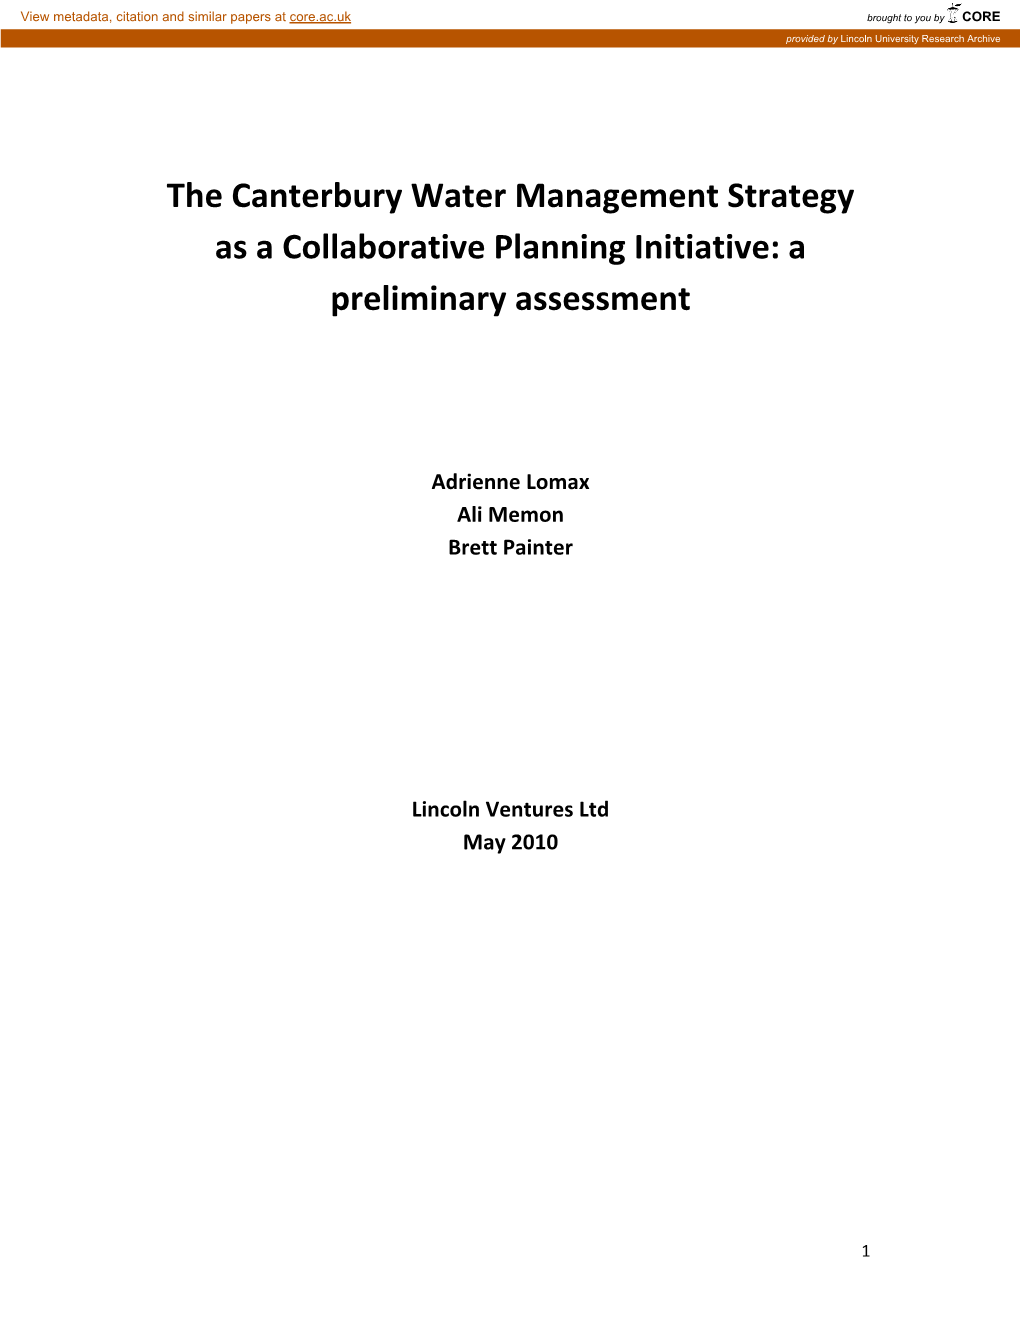 The Canterbury Water Management Strategy As a Collaborative Planning Initiative: a Preliminary Assessment